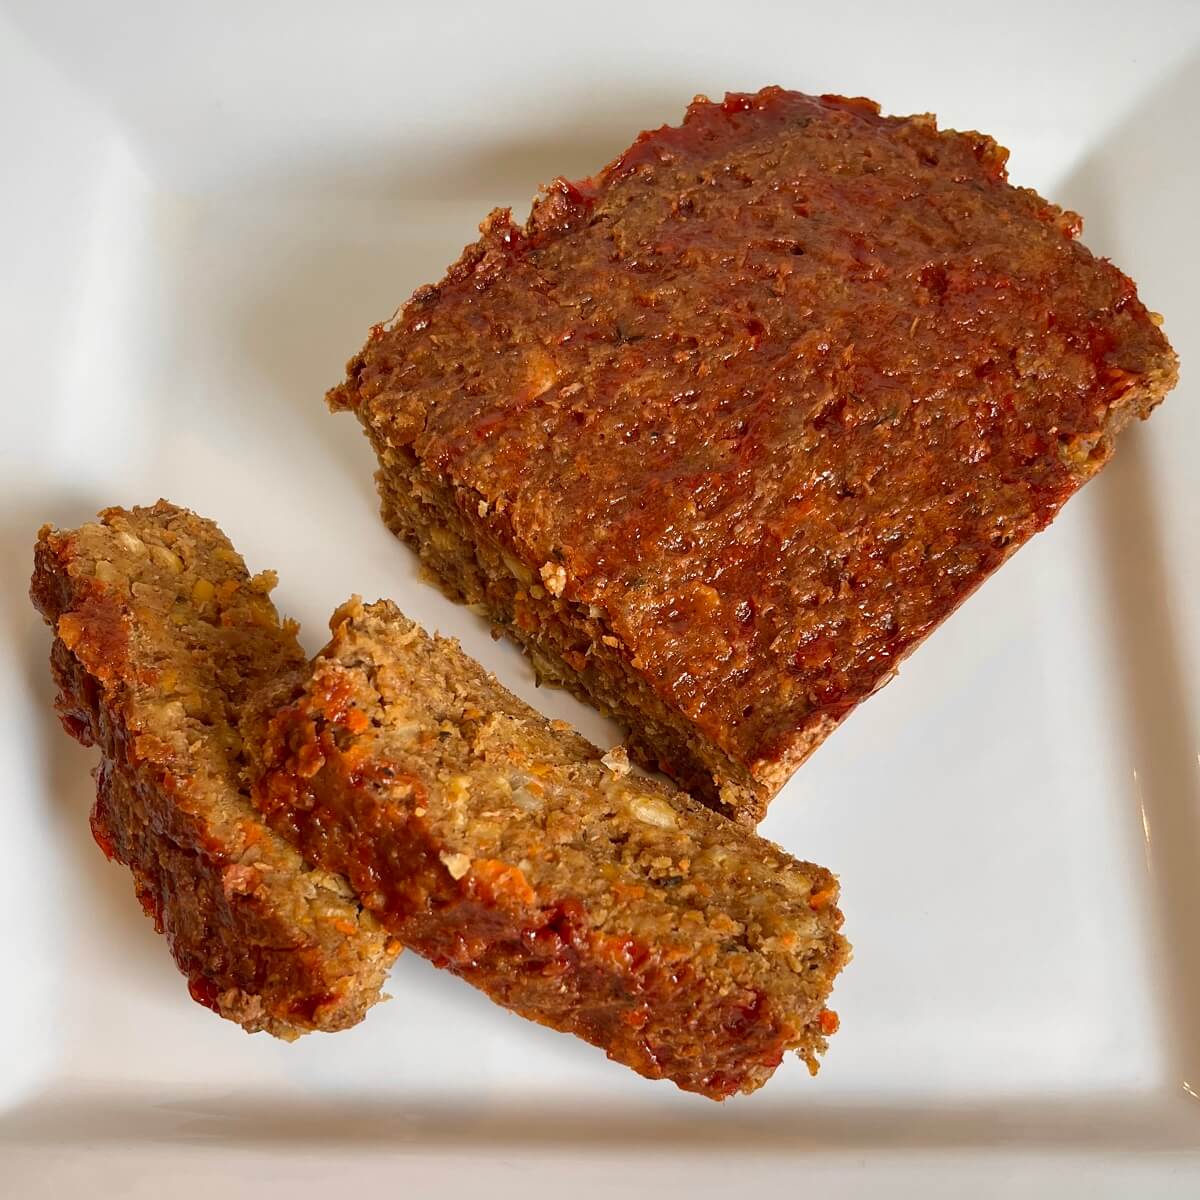 Vegan meatloaf on a plate with two thick slices cut.